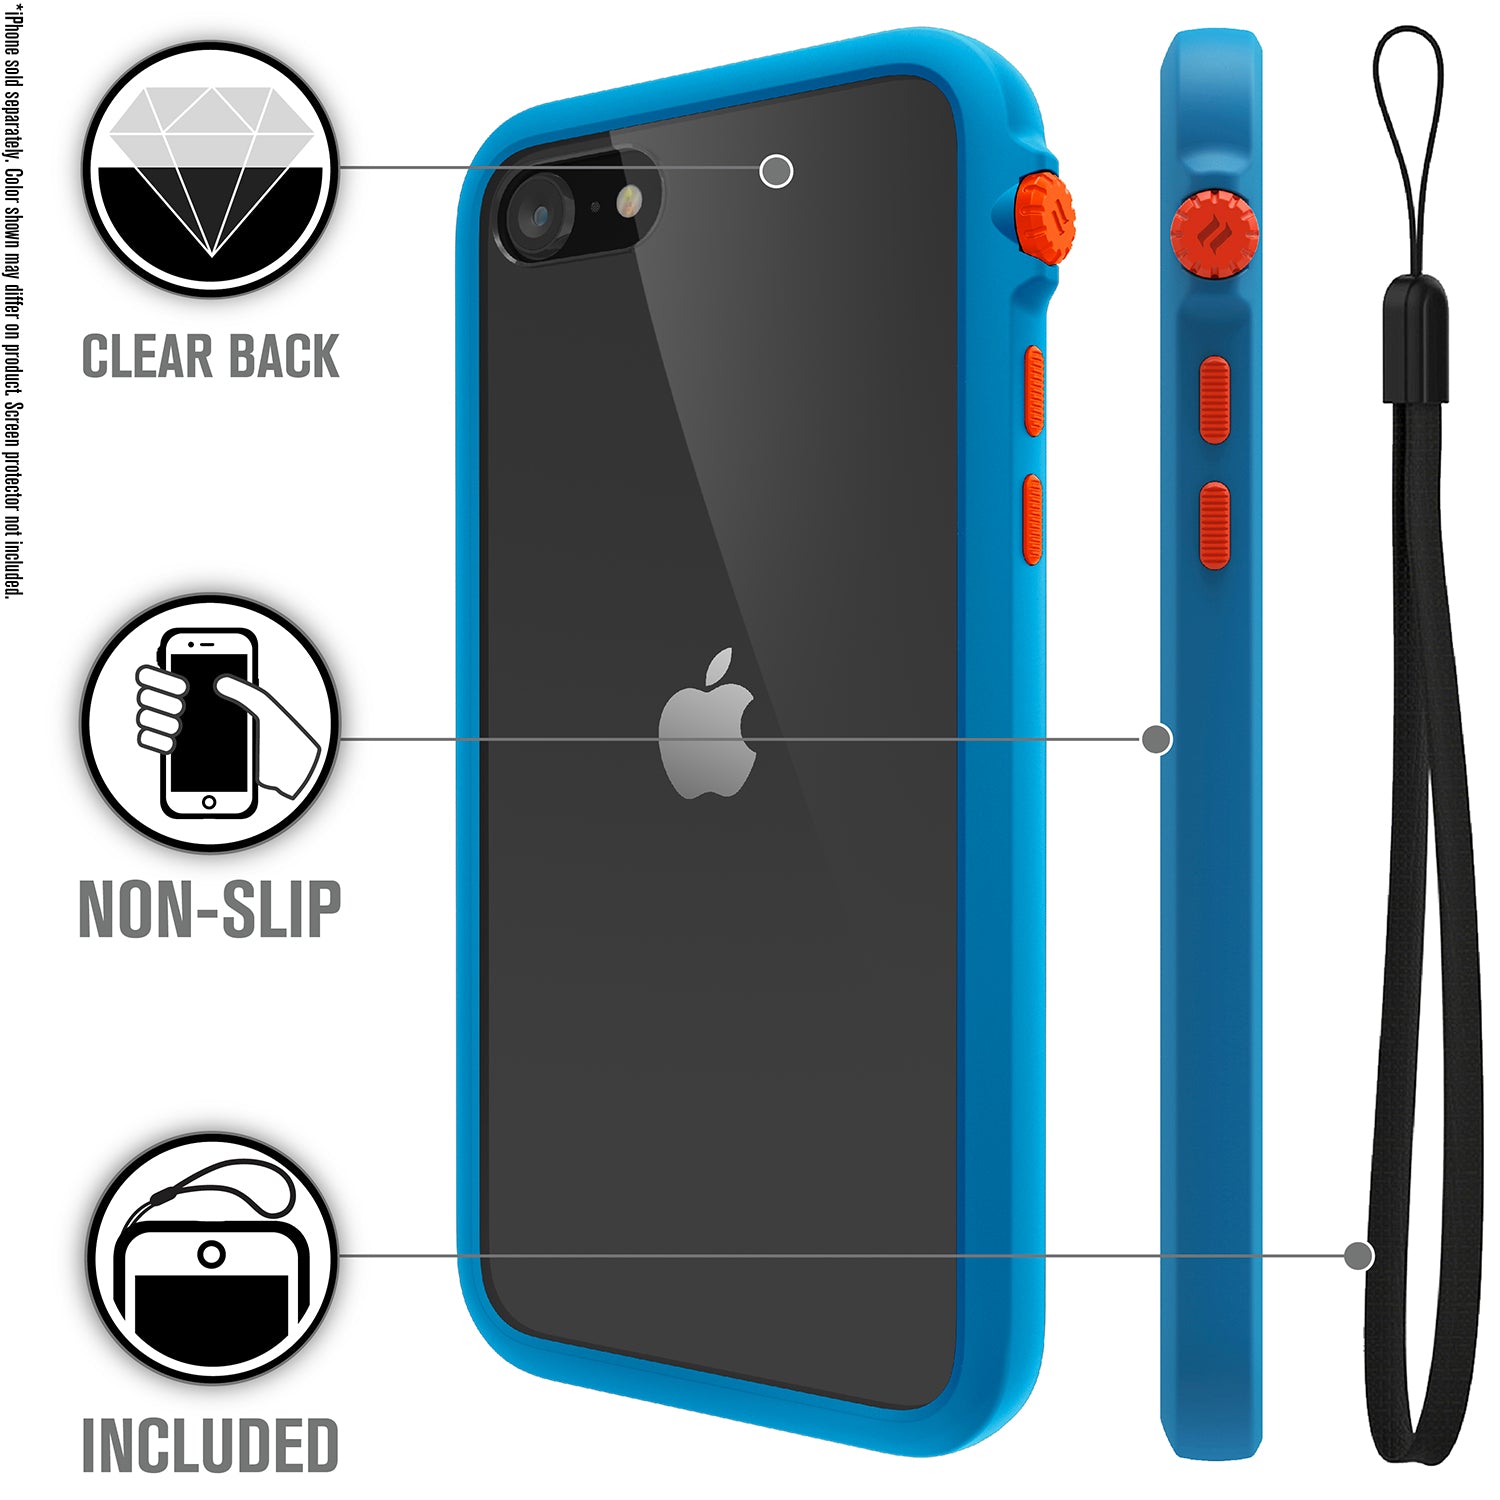 Catalyst iphone 8/7 impact protection case showing the case features with lanyard in a blueridge sunset colorway text reads clear back non-slip included